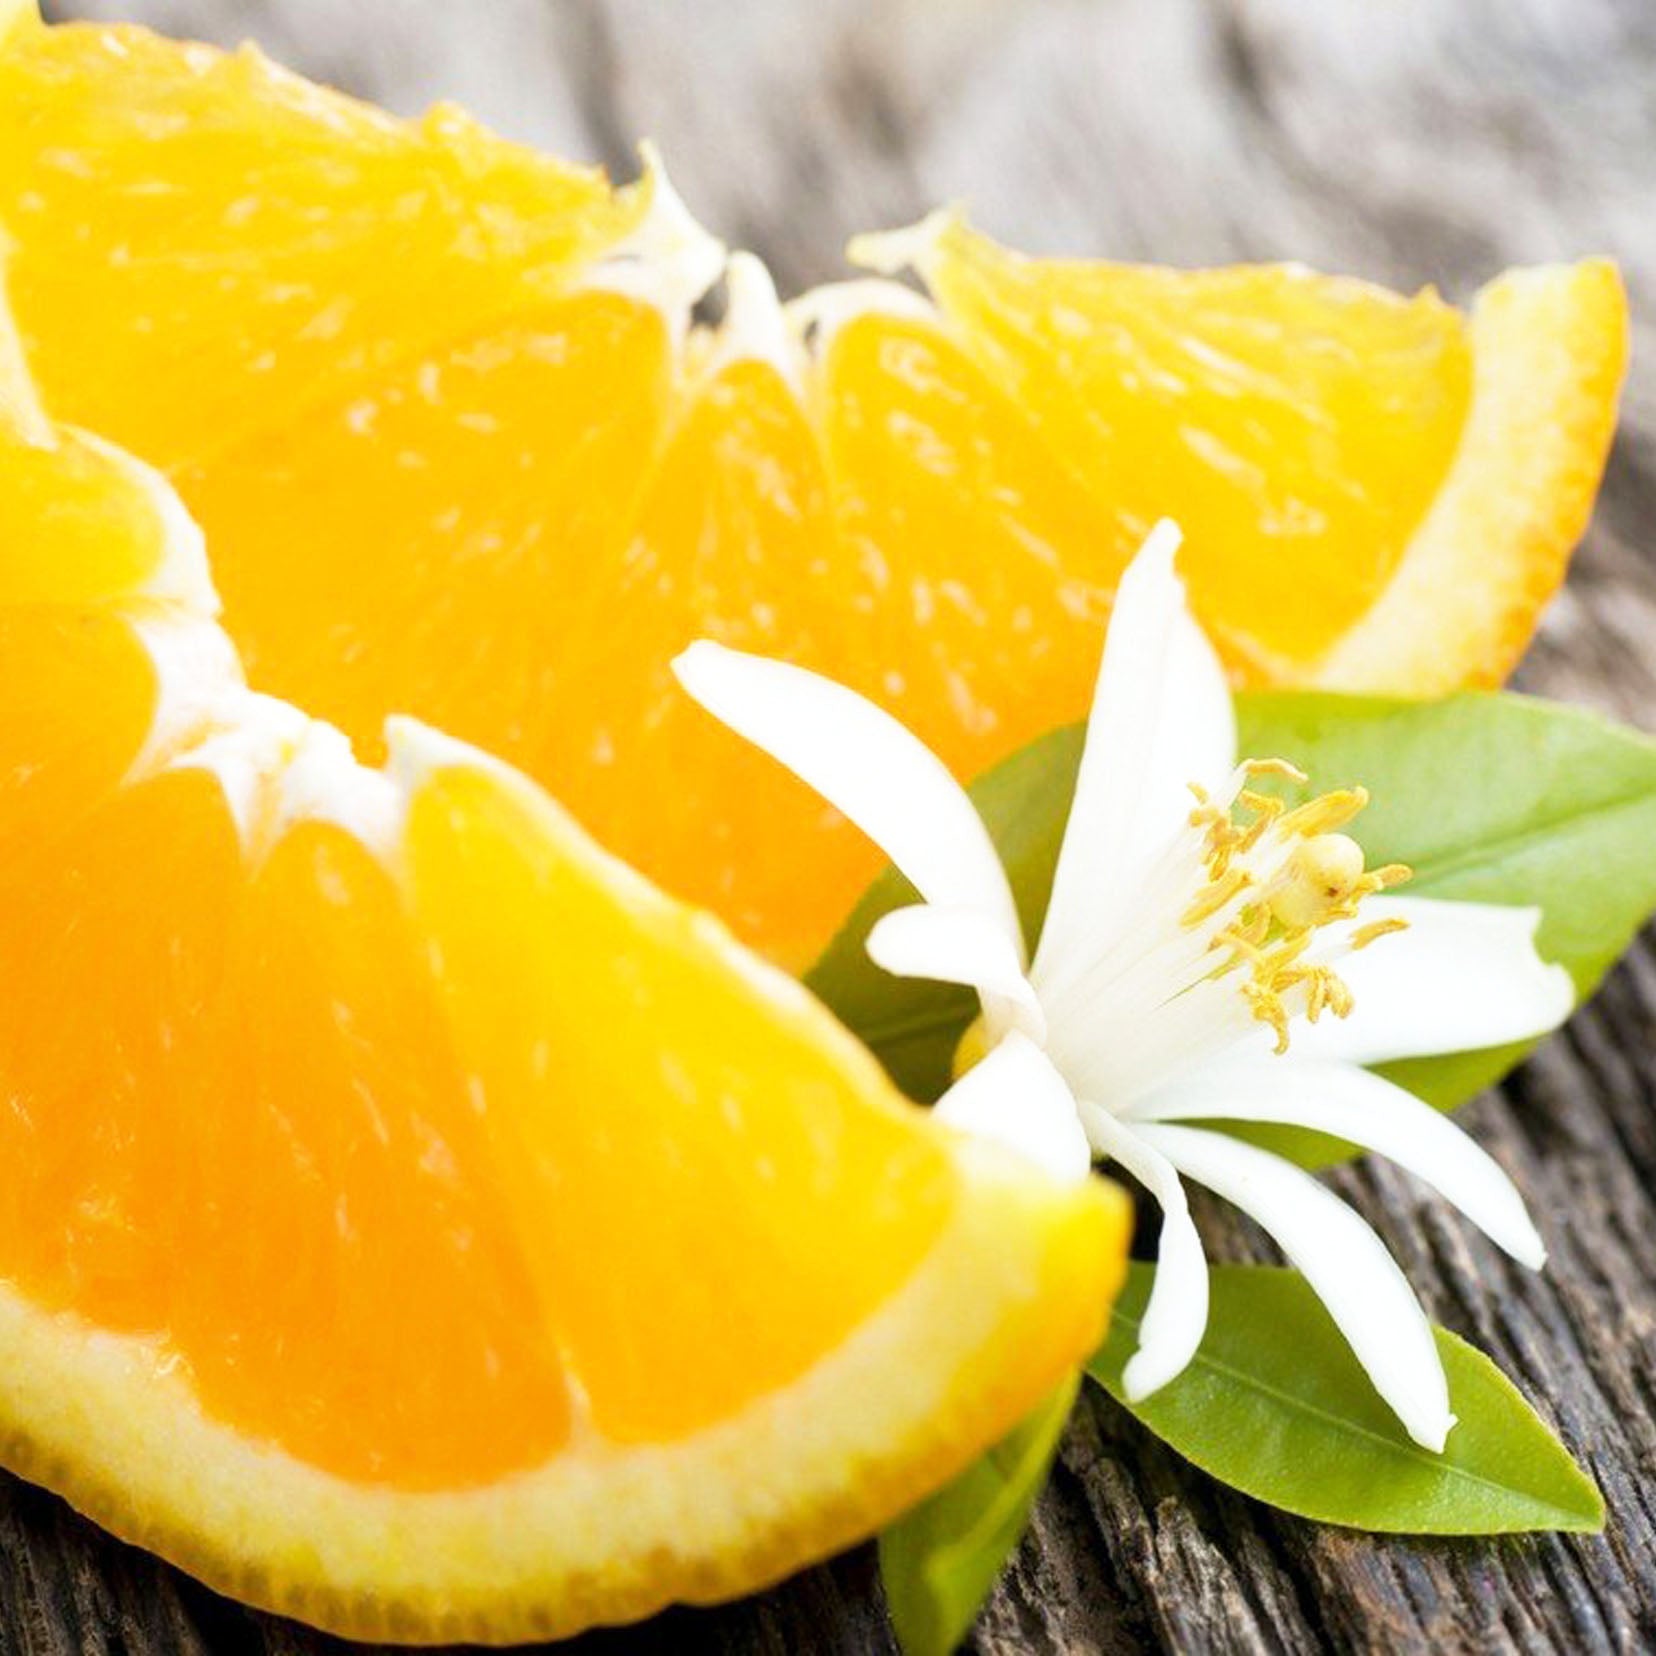 Orange Blossom Fragrance Oil | Truly Personal | Candles, Wax Melts, Soap, Bath Bombs